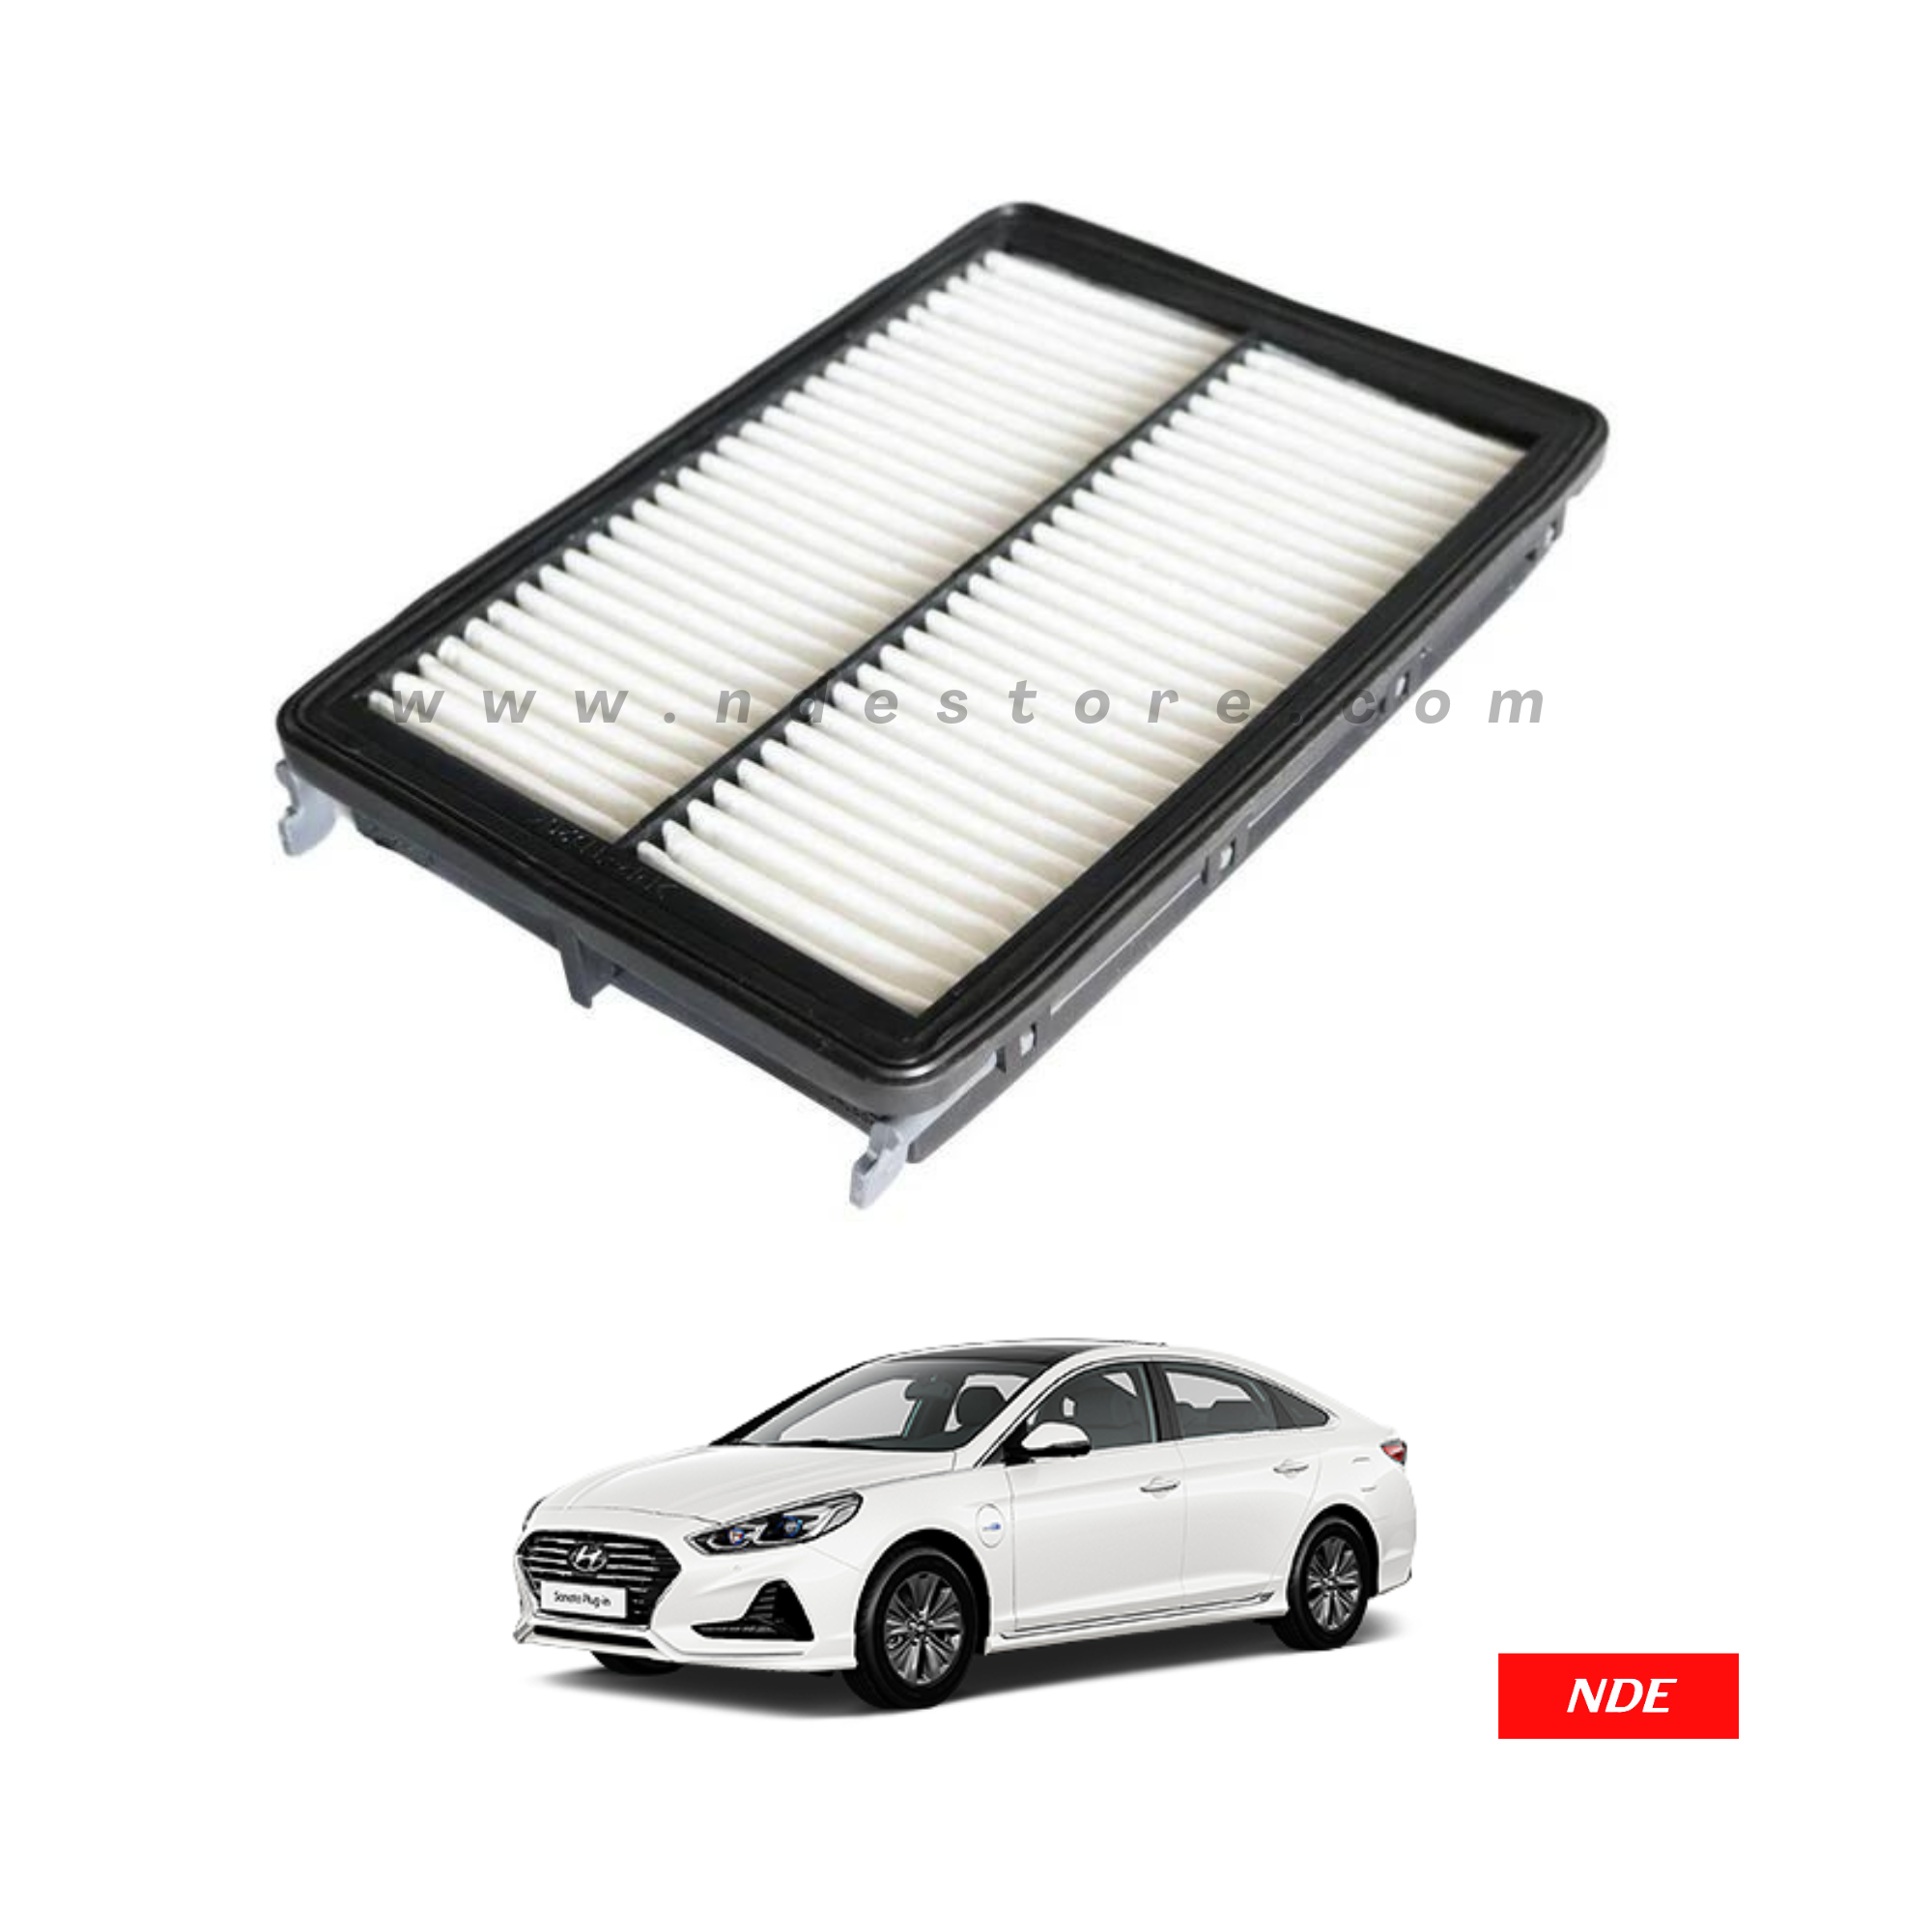 AIR FILTER ELEMENT FOR HYUNDAI SONATA (IMPORTED)